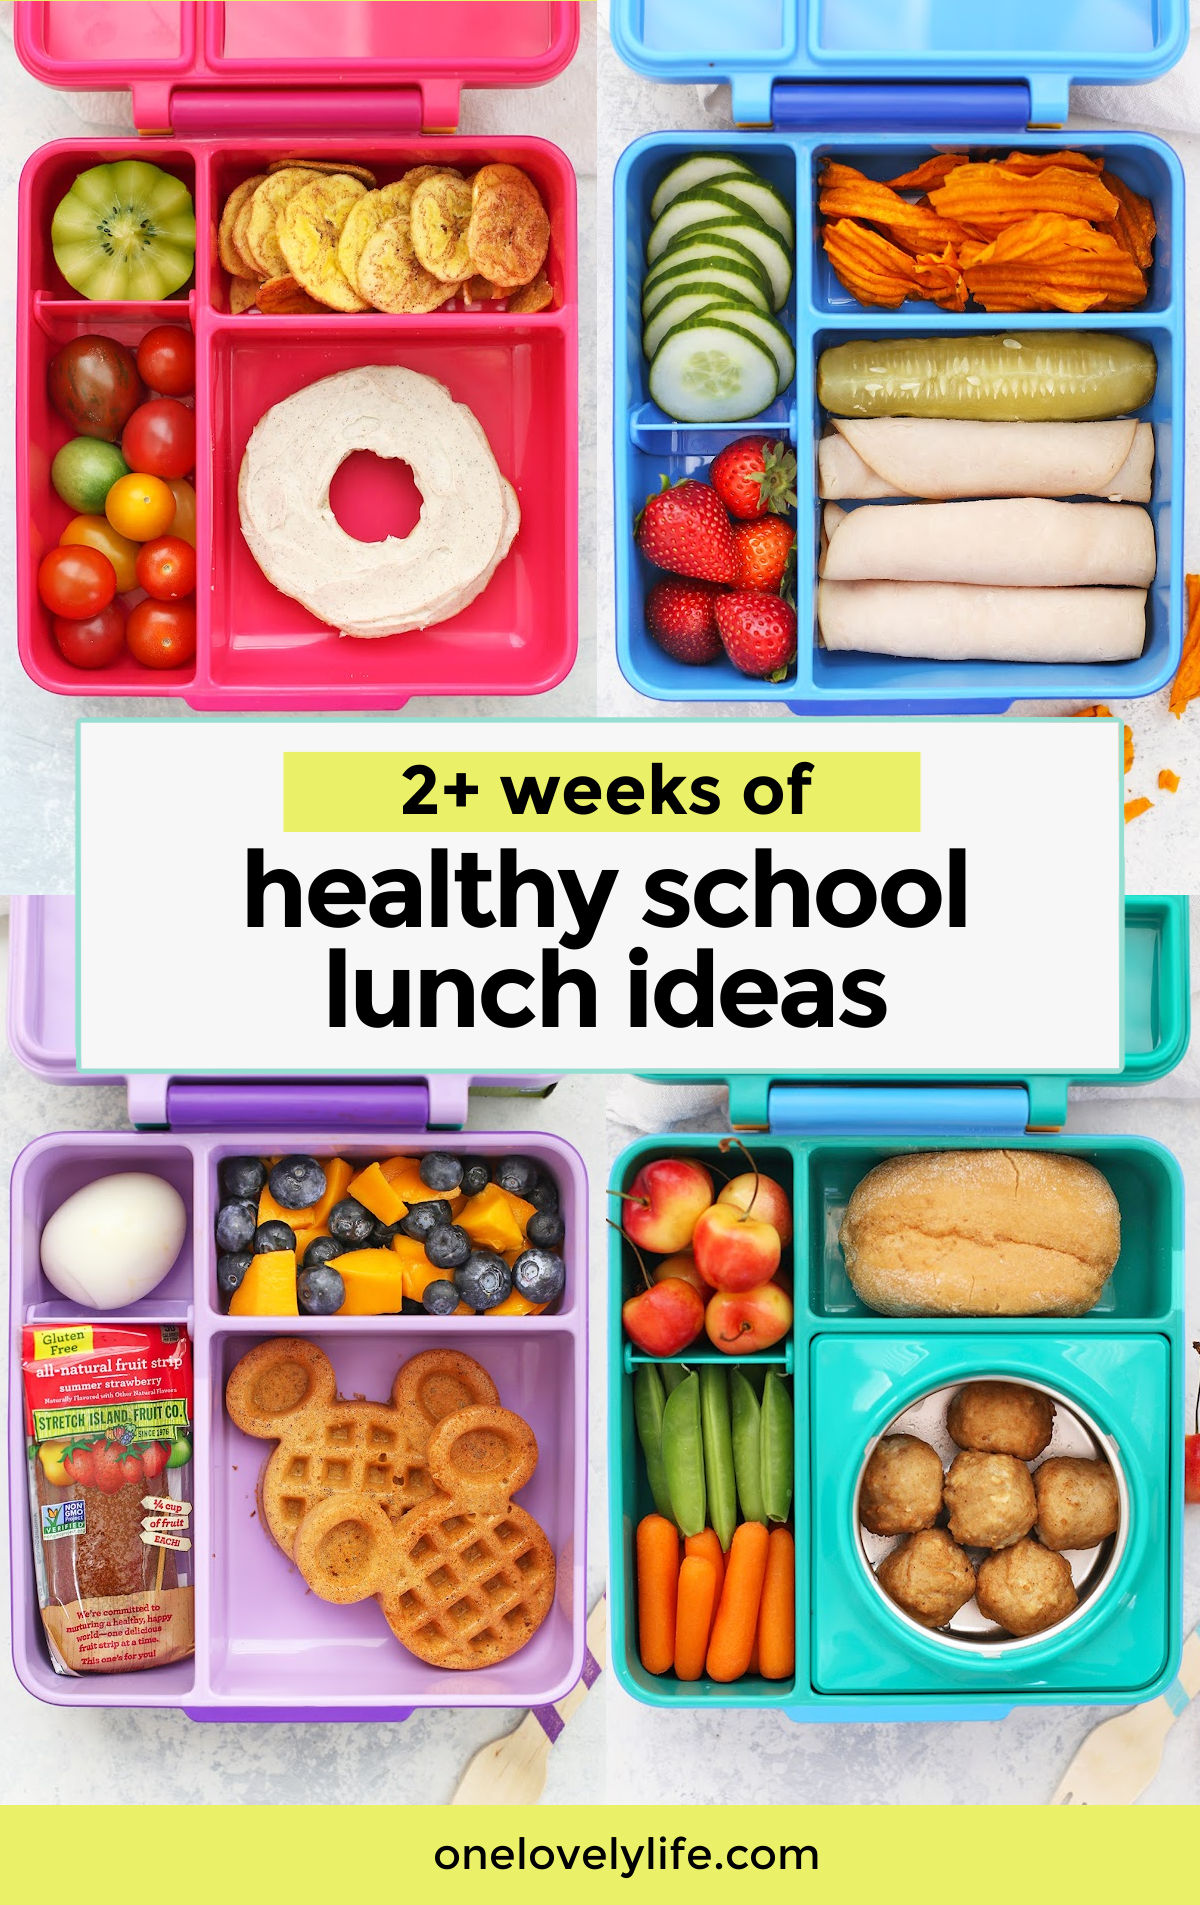 Get 2 Weeks of Healthy School Lunch Ideas in this post, plus a free printable packed lunch cheat sheet for creating your own combinations! // Gluten free school lunch ideas // paleo school lunch // paleo lunch for kids // vegan school lunch ideas // healthy school lunches // dairy free school lunch ideas // school lunch inspiration // kids bento box // kids bento lunch // toddler lunch // omie box // gluten free school lunch ideas // gluten free packed lunch ideas // gluten free kids lunch ideas